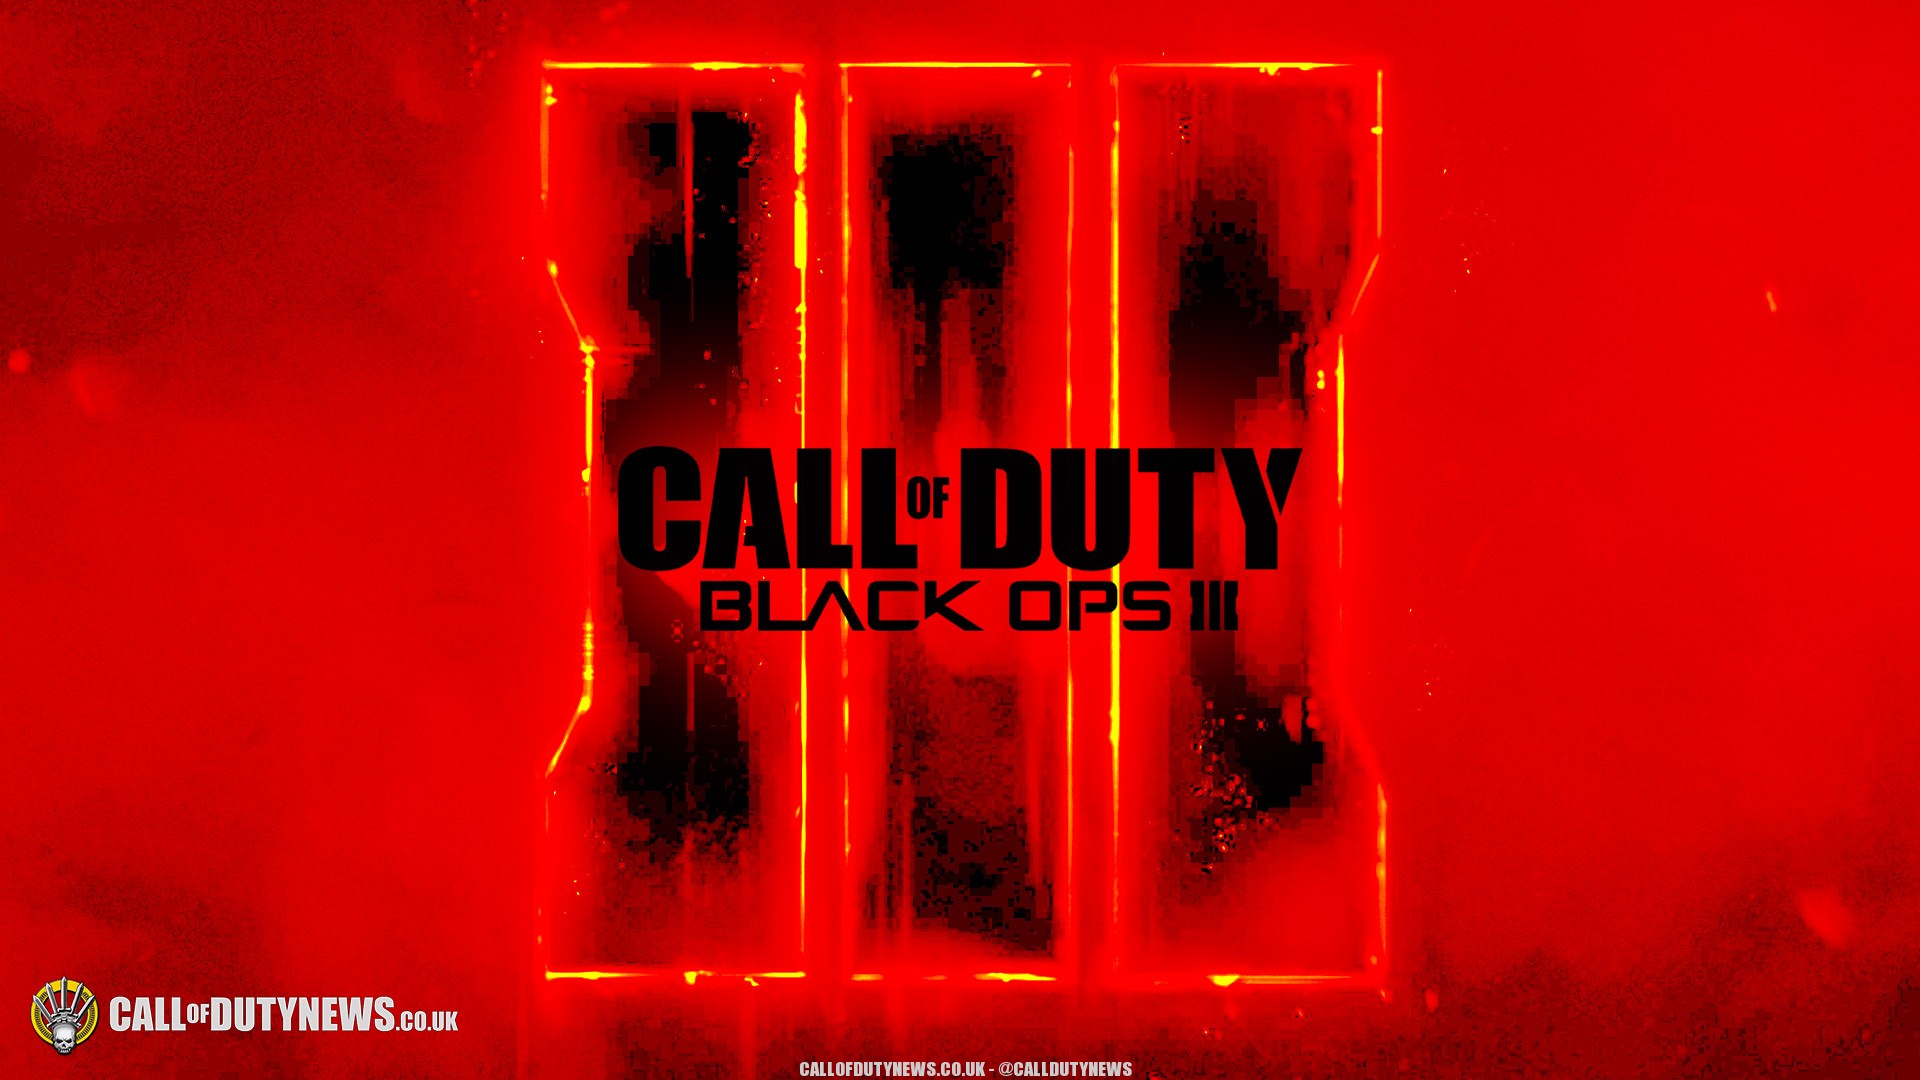 Enjoy these 1080p HD Black Ops 3 wallpapers by callofdutyblogcom